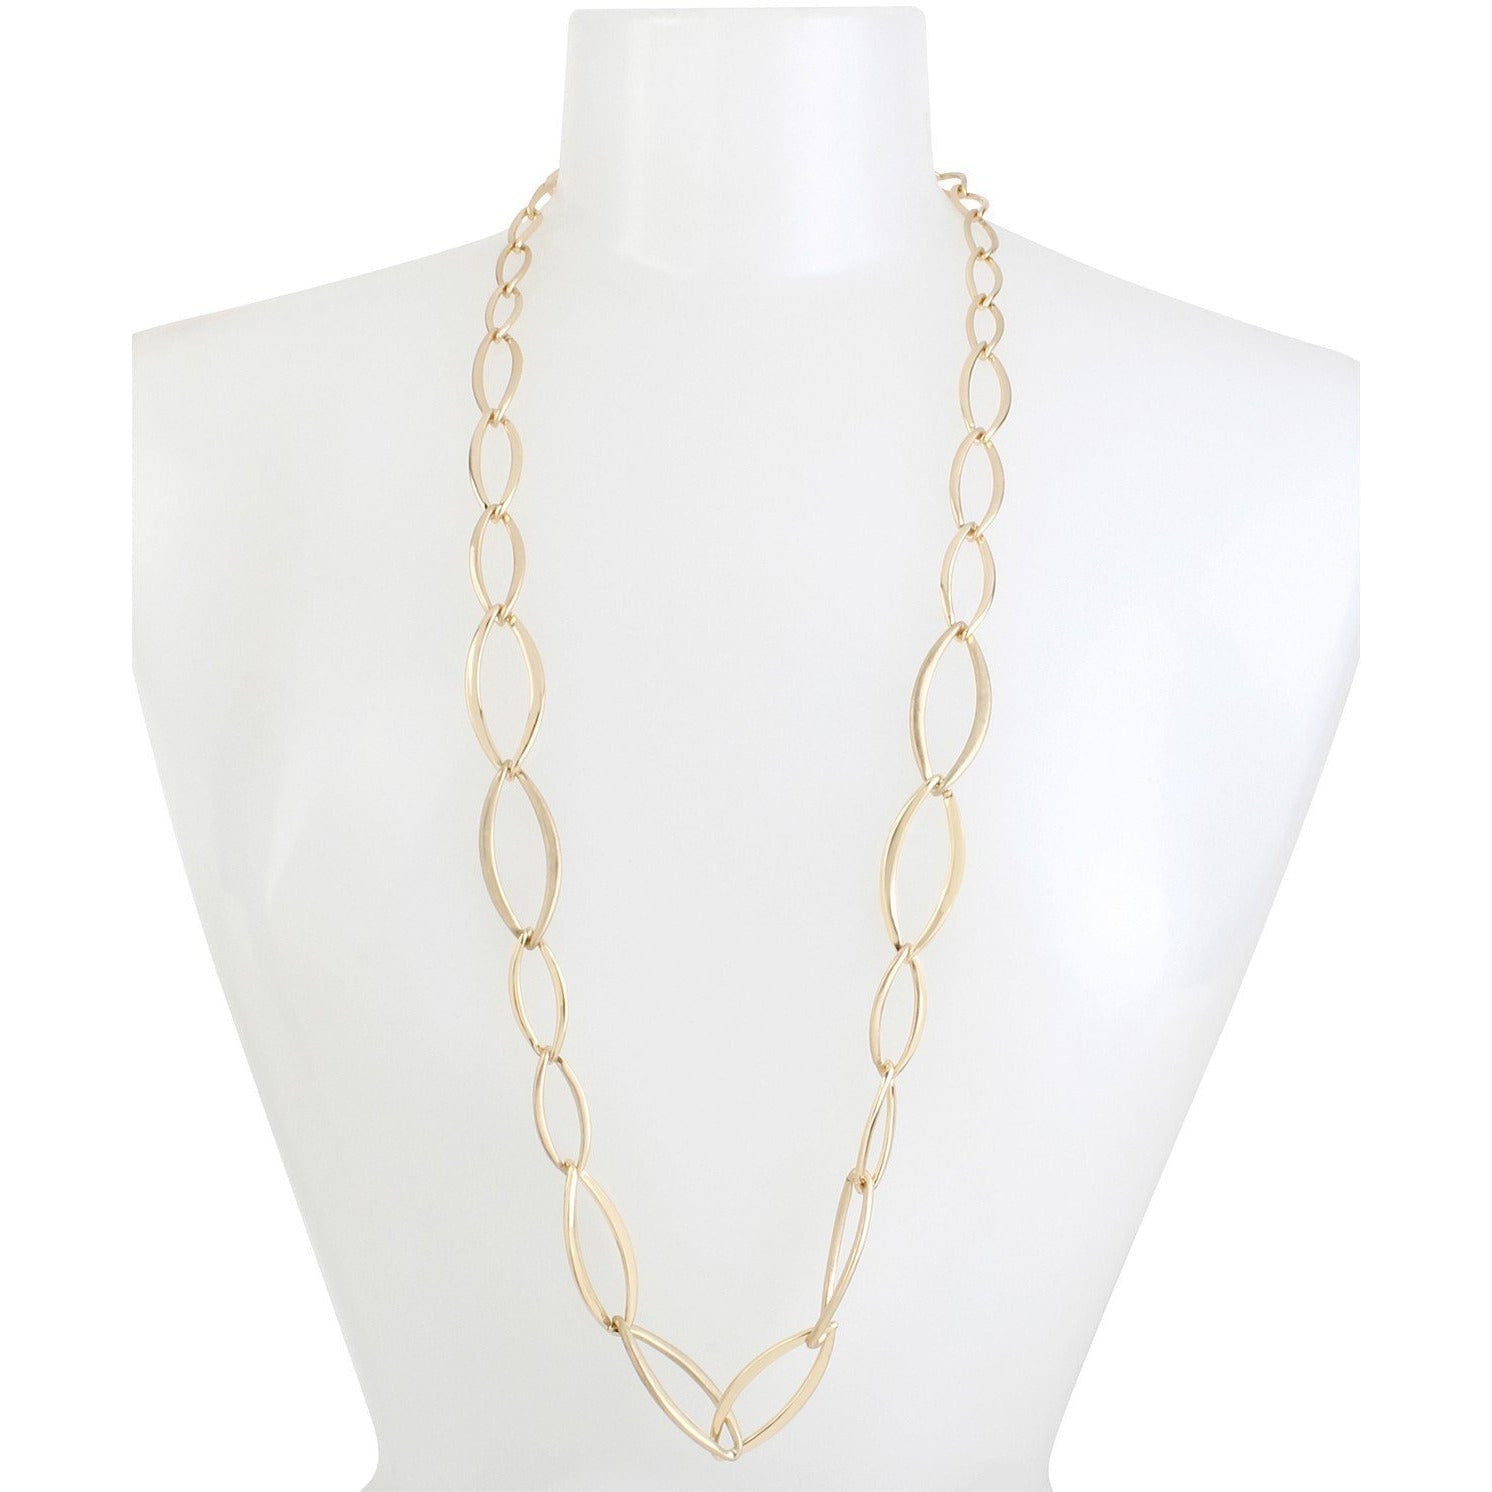 Robert Lee Morris Soho Interlocking Oval Link Necklace - The Pink Pigs, A Compassionate Boutique